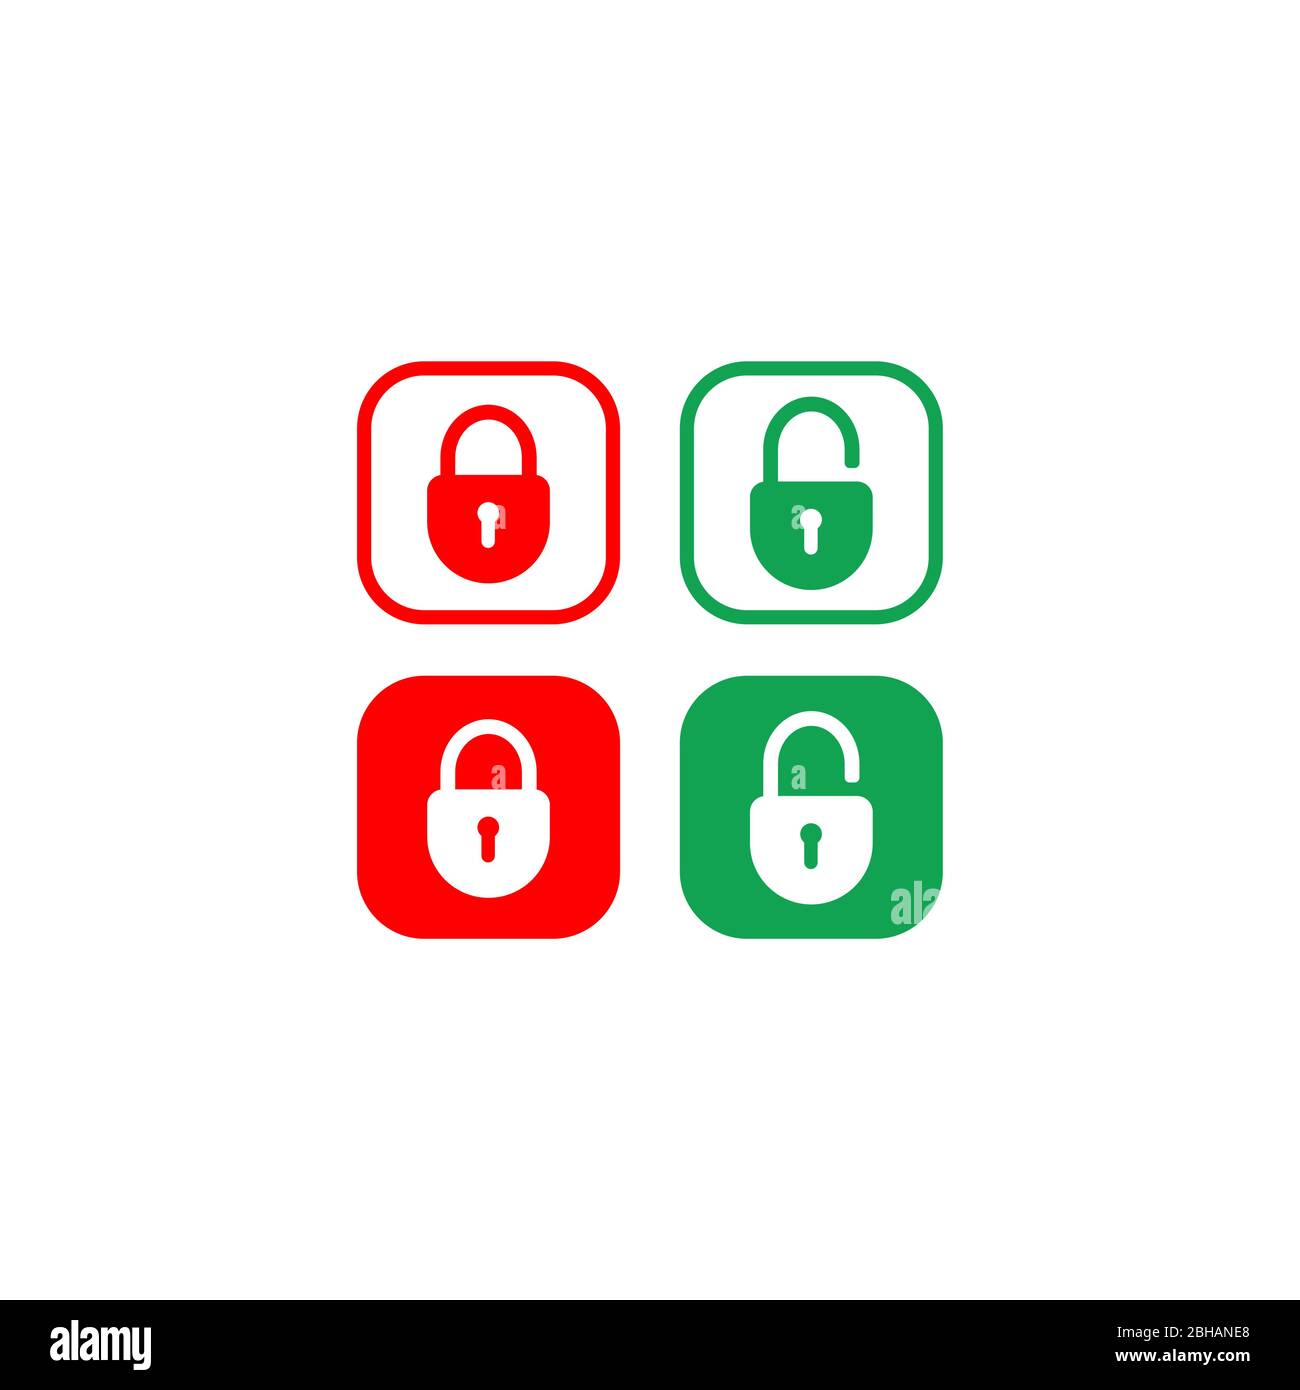 Minimal Lock Unlock button set. Padlock icon vector illustration with rounded rectangle shape. Security design element. Protection symbol isolated Stock Vector